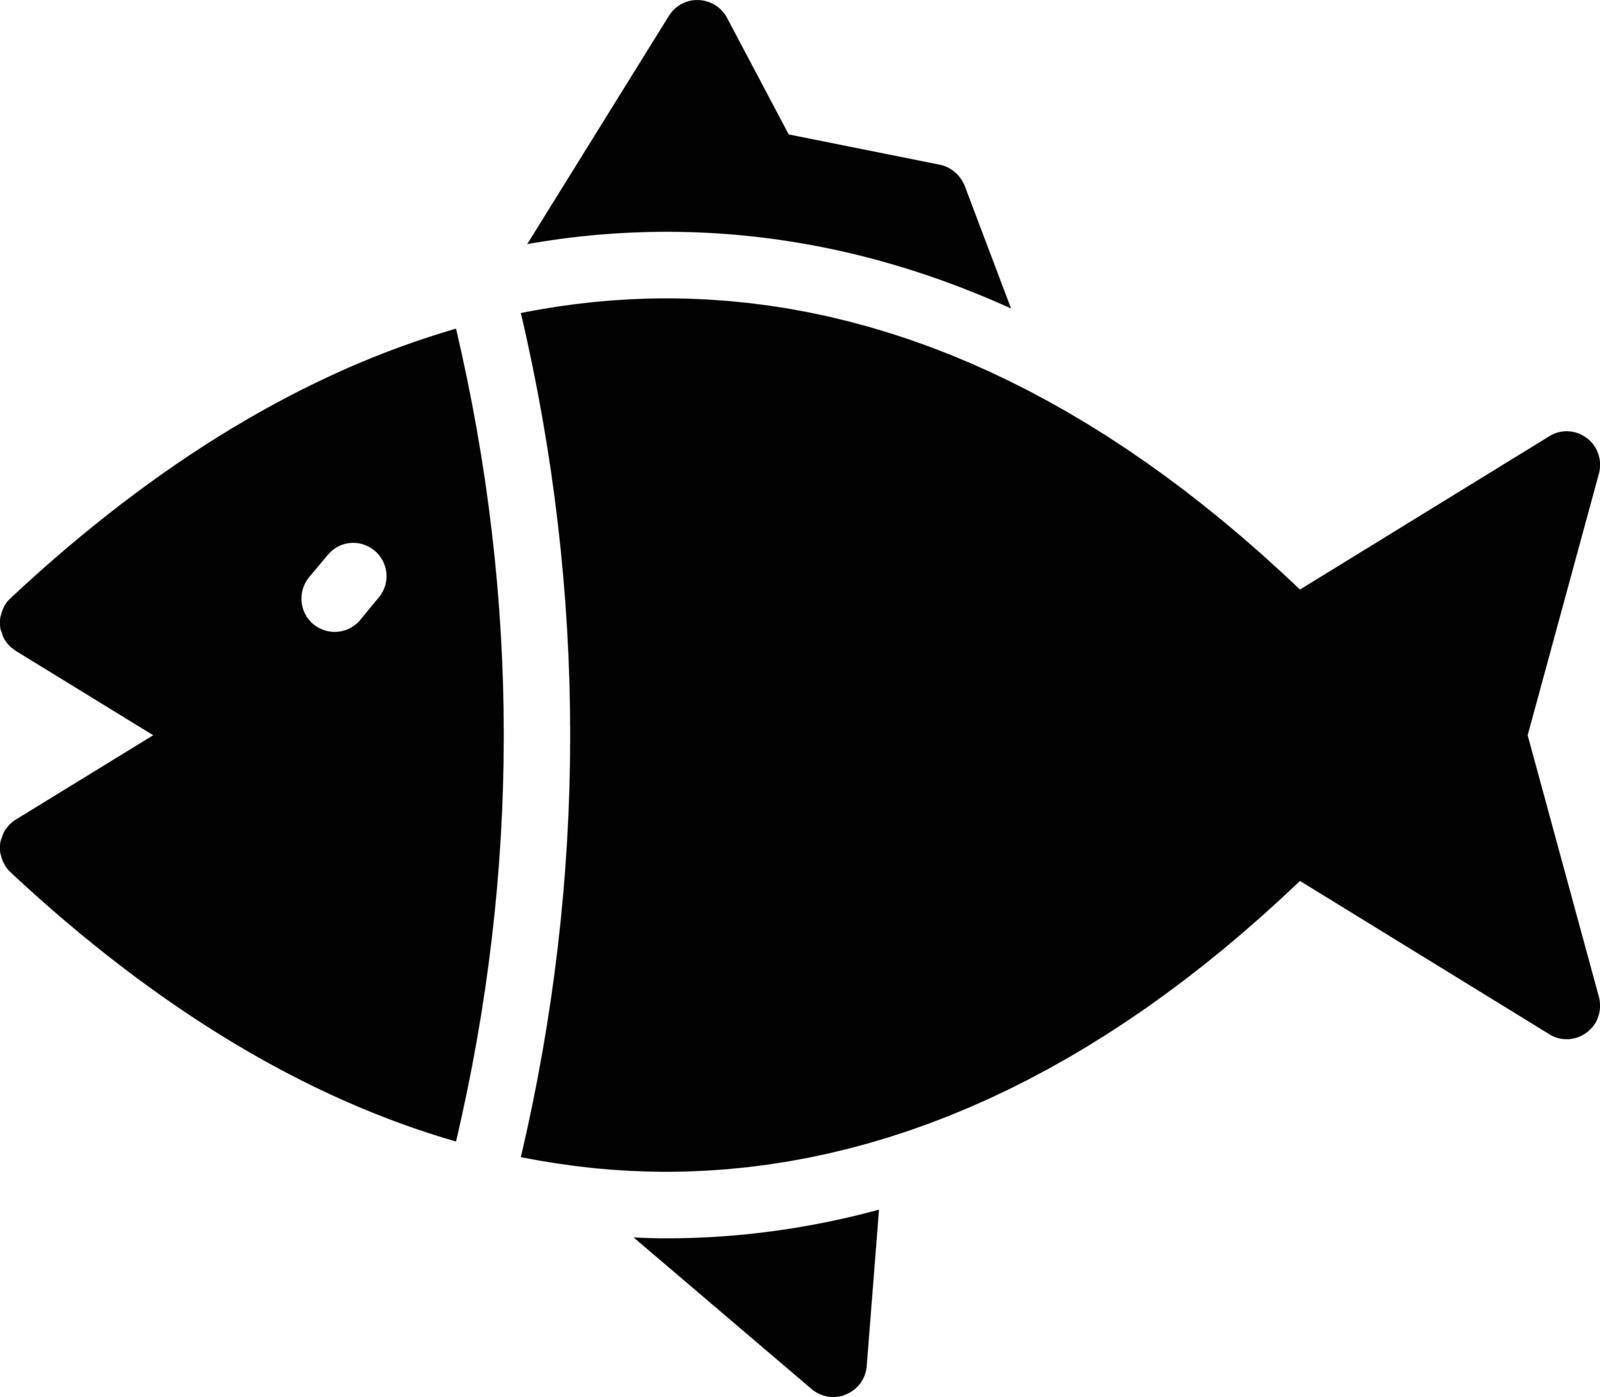 Fish Vector illustration on a transparent background.Premium quality symbols.Glyphs vector icon for concept and graphic design.